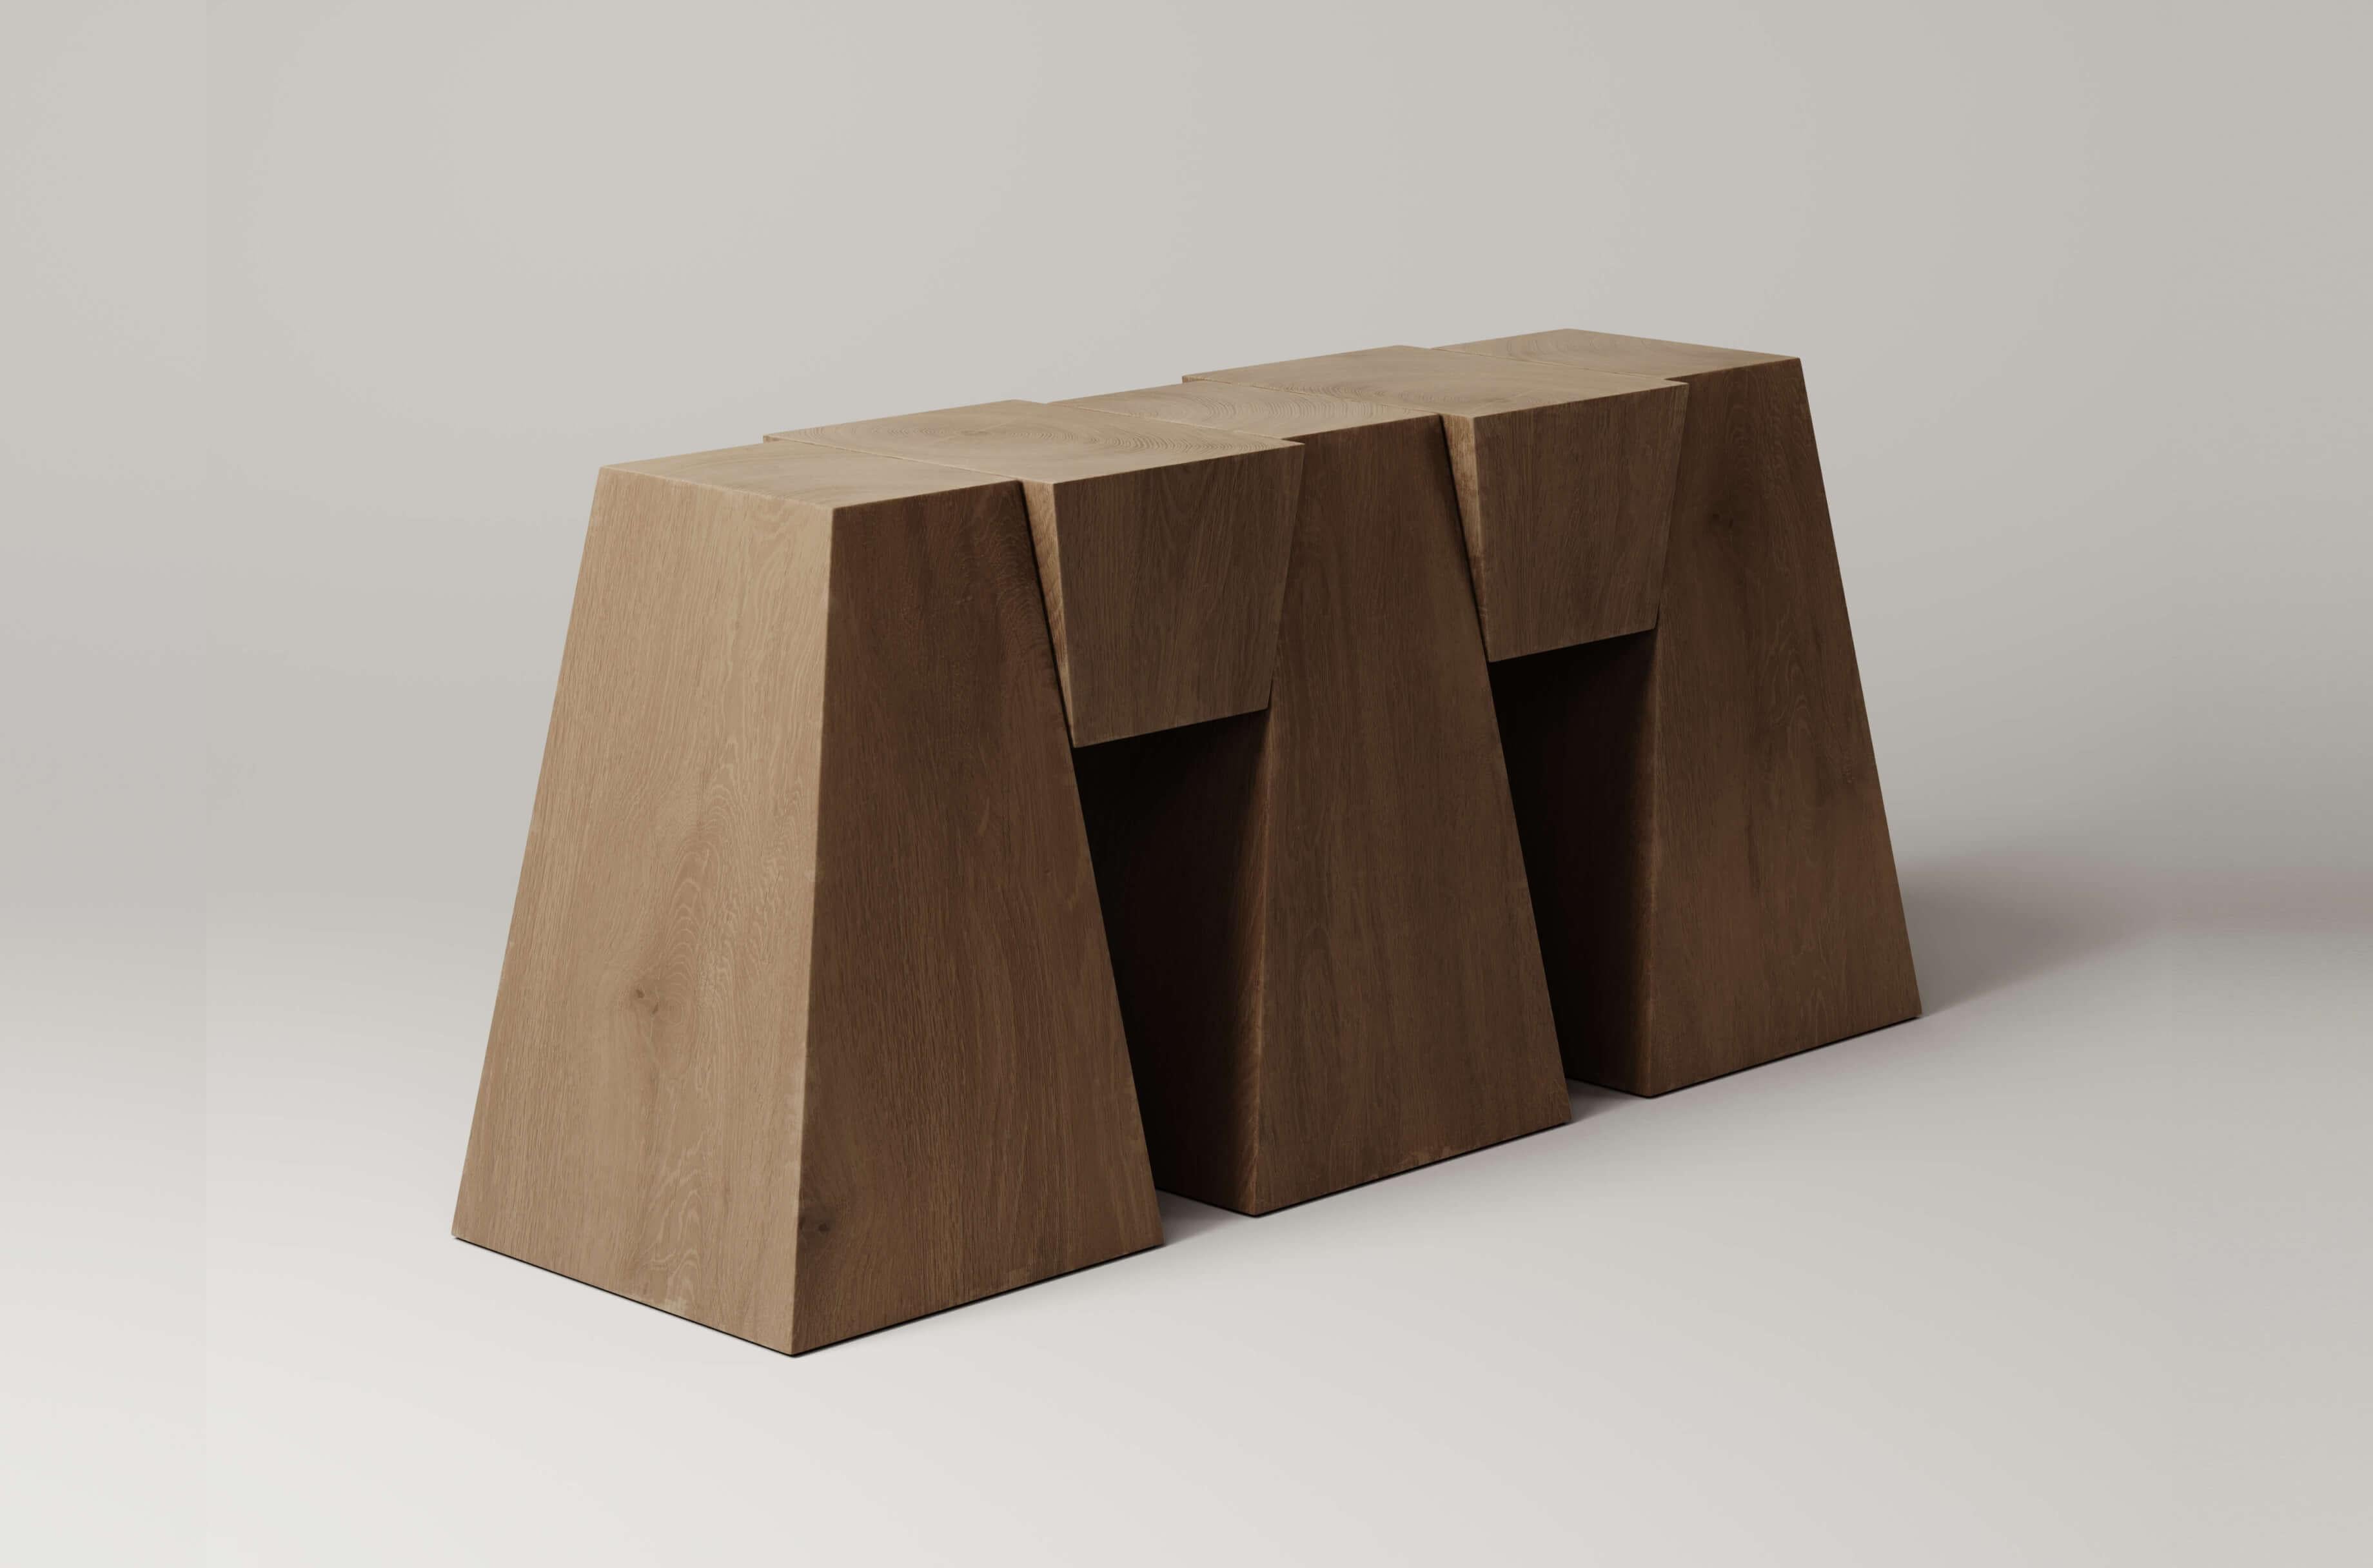 Assembled from 5 parts, the sophisticated inverse geometry and pure lines of the M_006 Console play with your sense of depth and space — its blocks effortlessly suspended above the ground. 

Numbered, Signed, and includes Certificate of